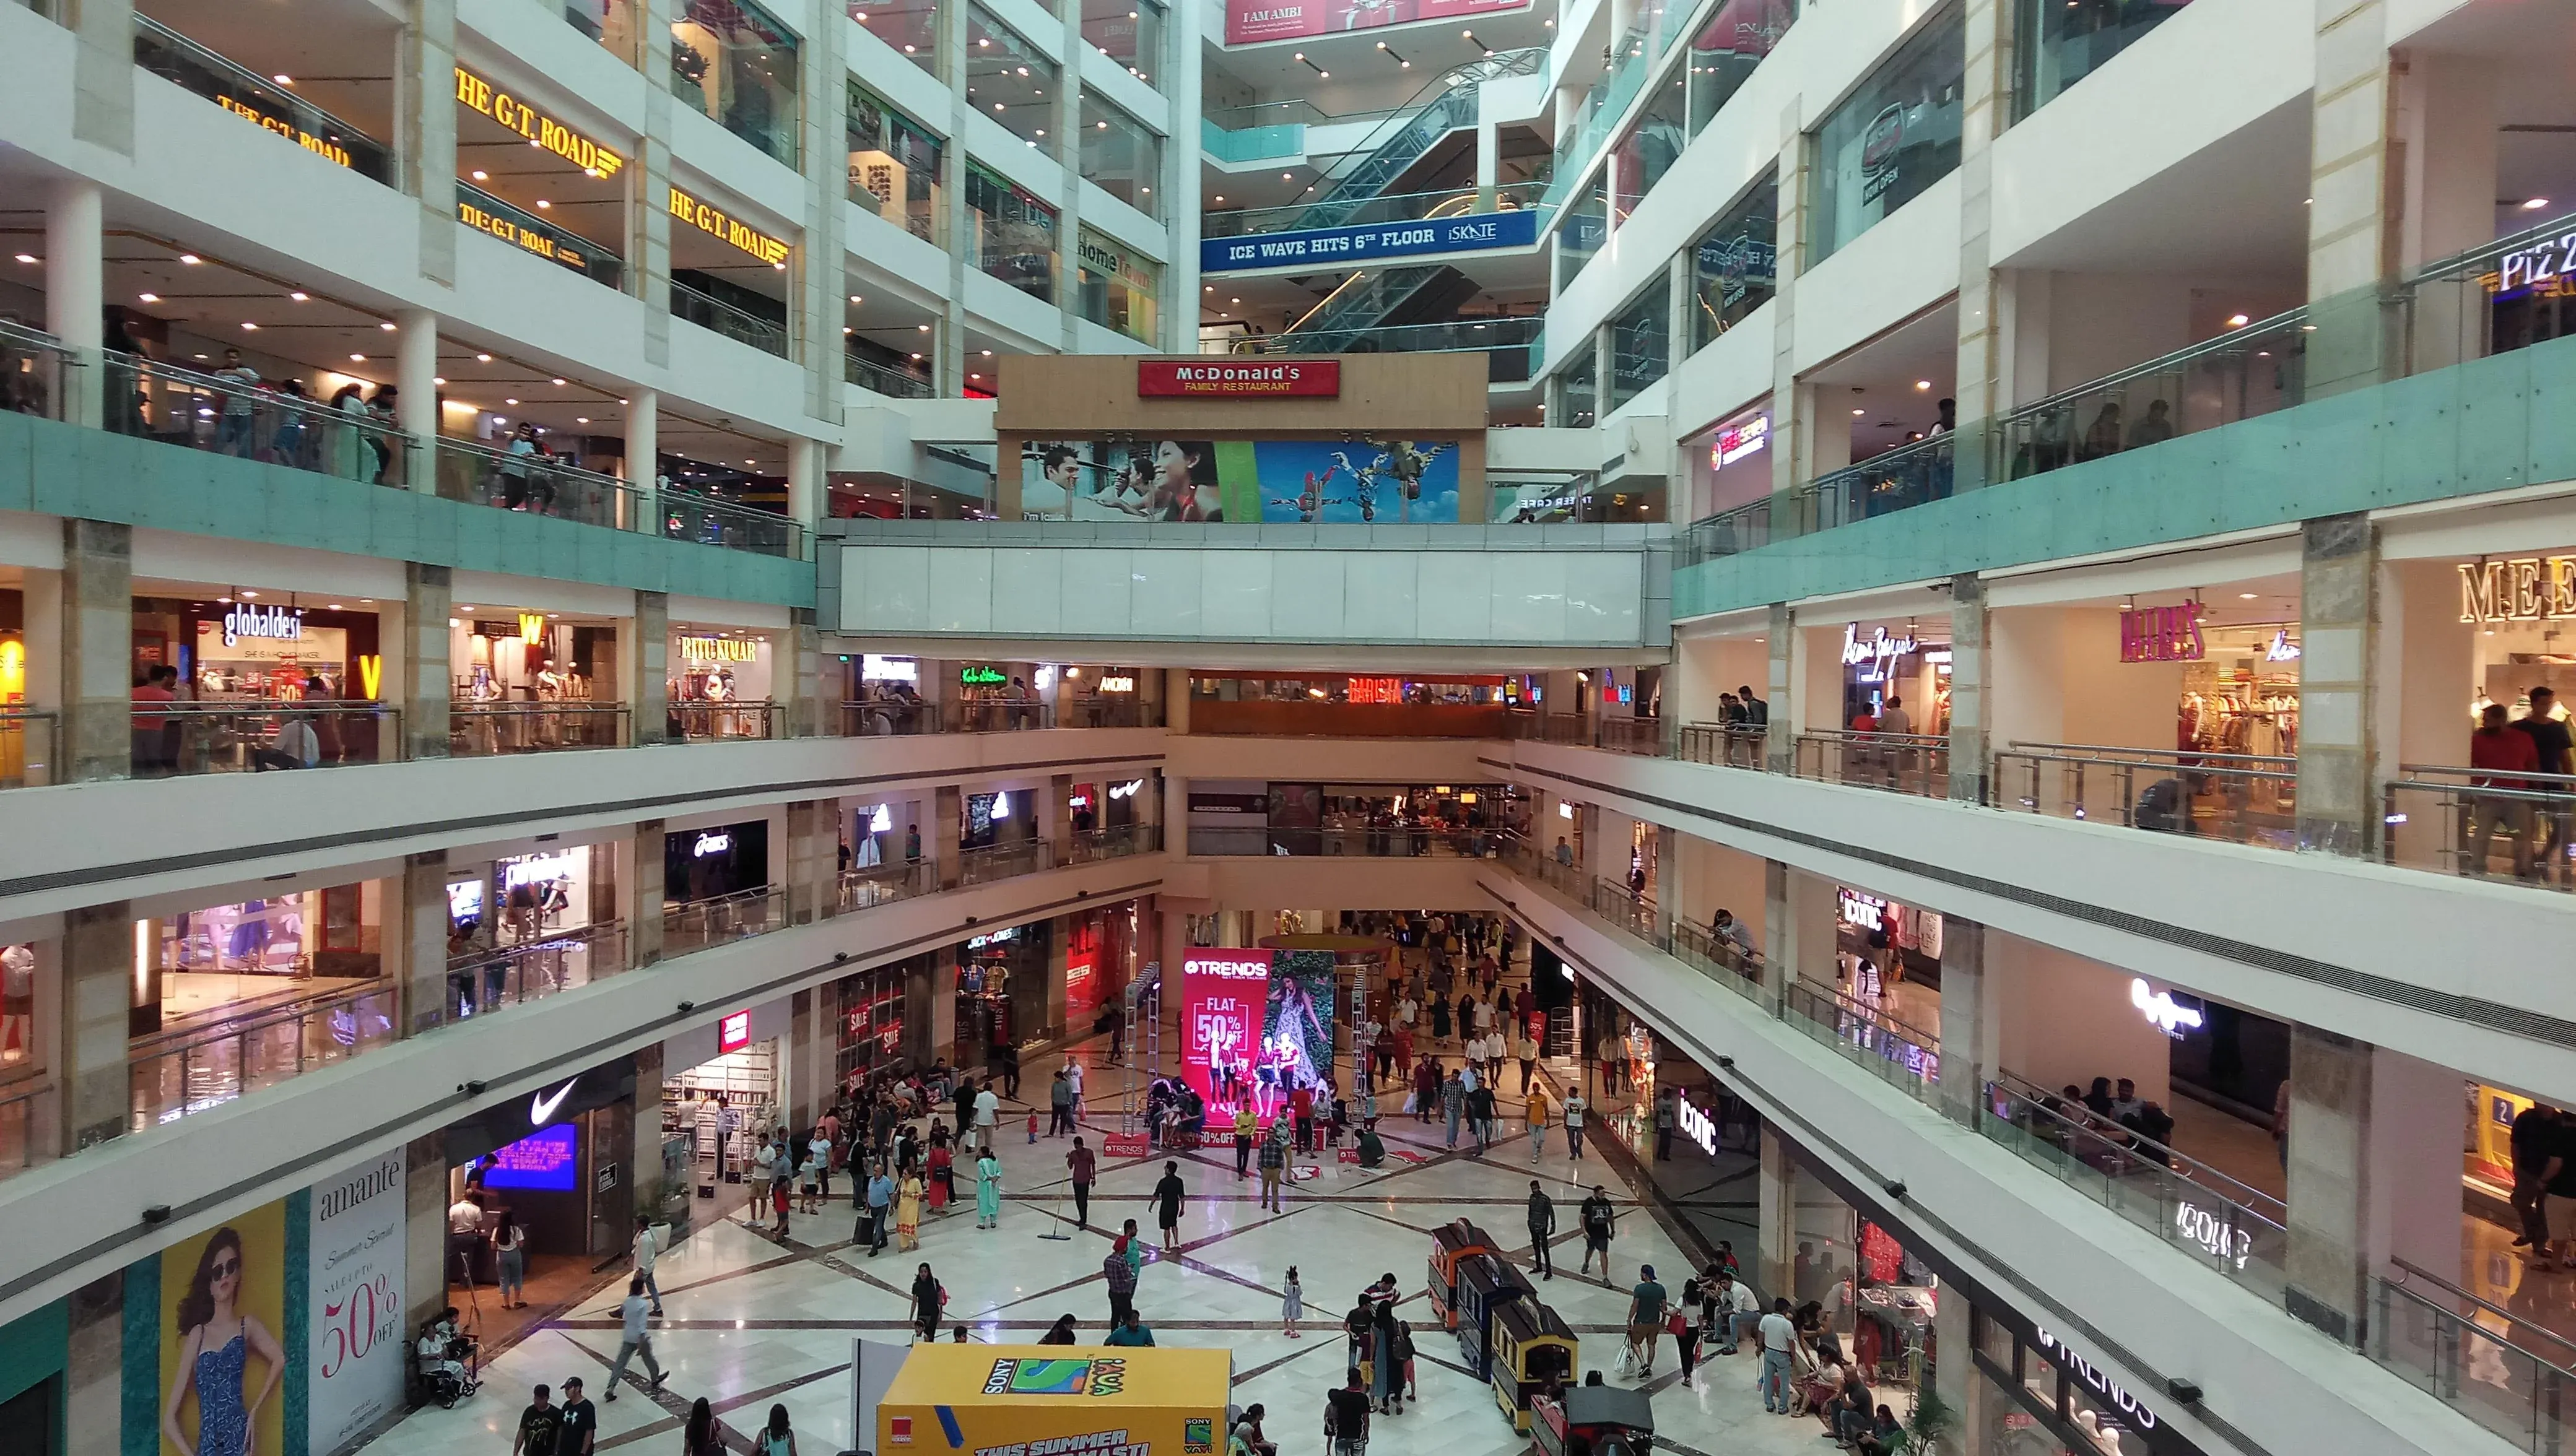 Ambience Mall in India, central_asia | Handbags,Accessories,Clothes,Cosmetics,Swimwear - Country Helper